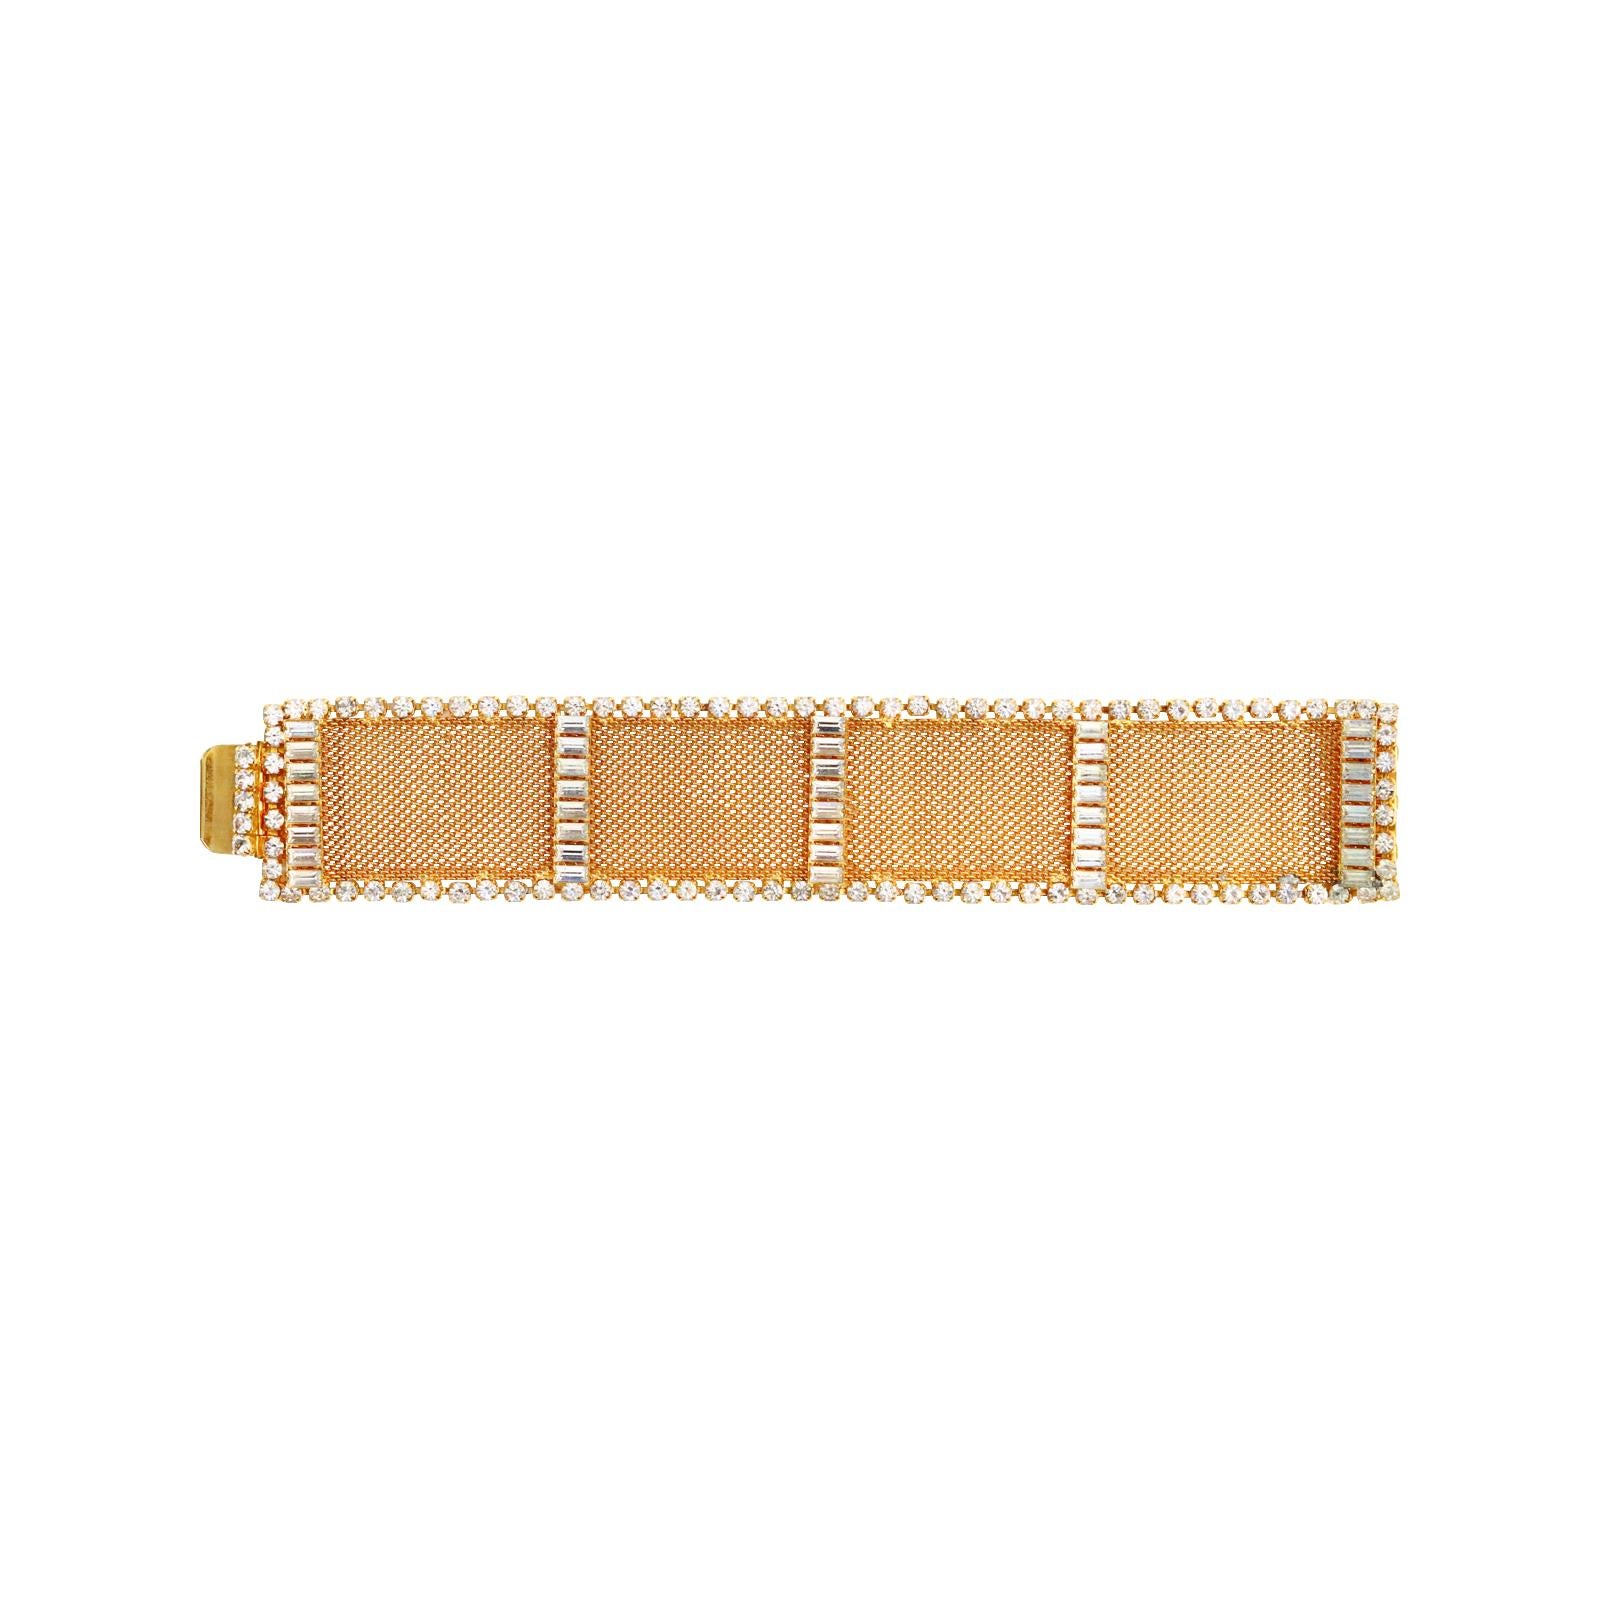 Vintage DeLillo Gold Mesh with Crystals Bracelet Circa 1970s. Classic DeLillo with baguette and round crystals on a piece of mesh.  Very classic bracelet.